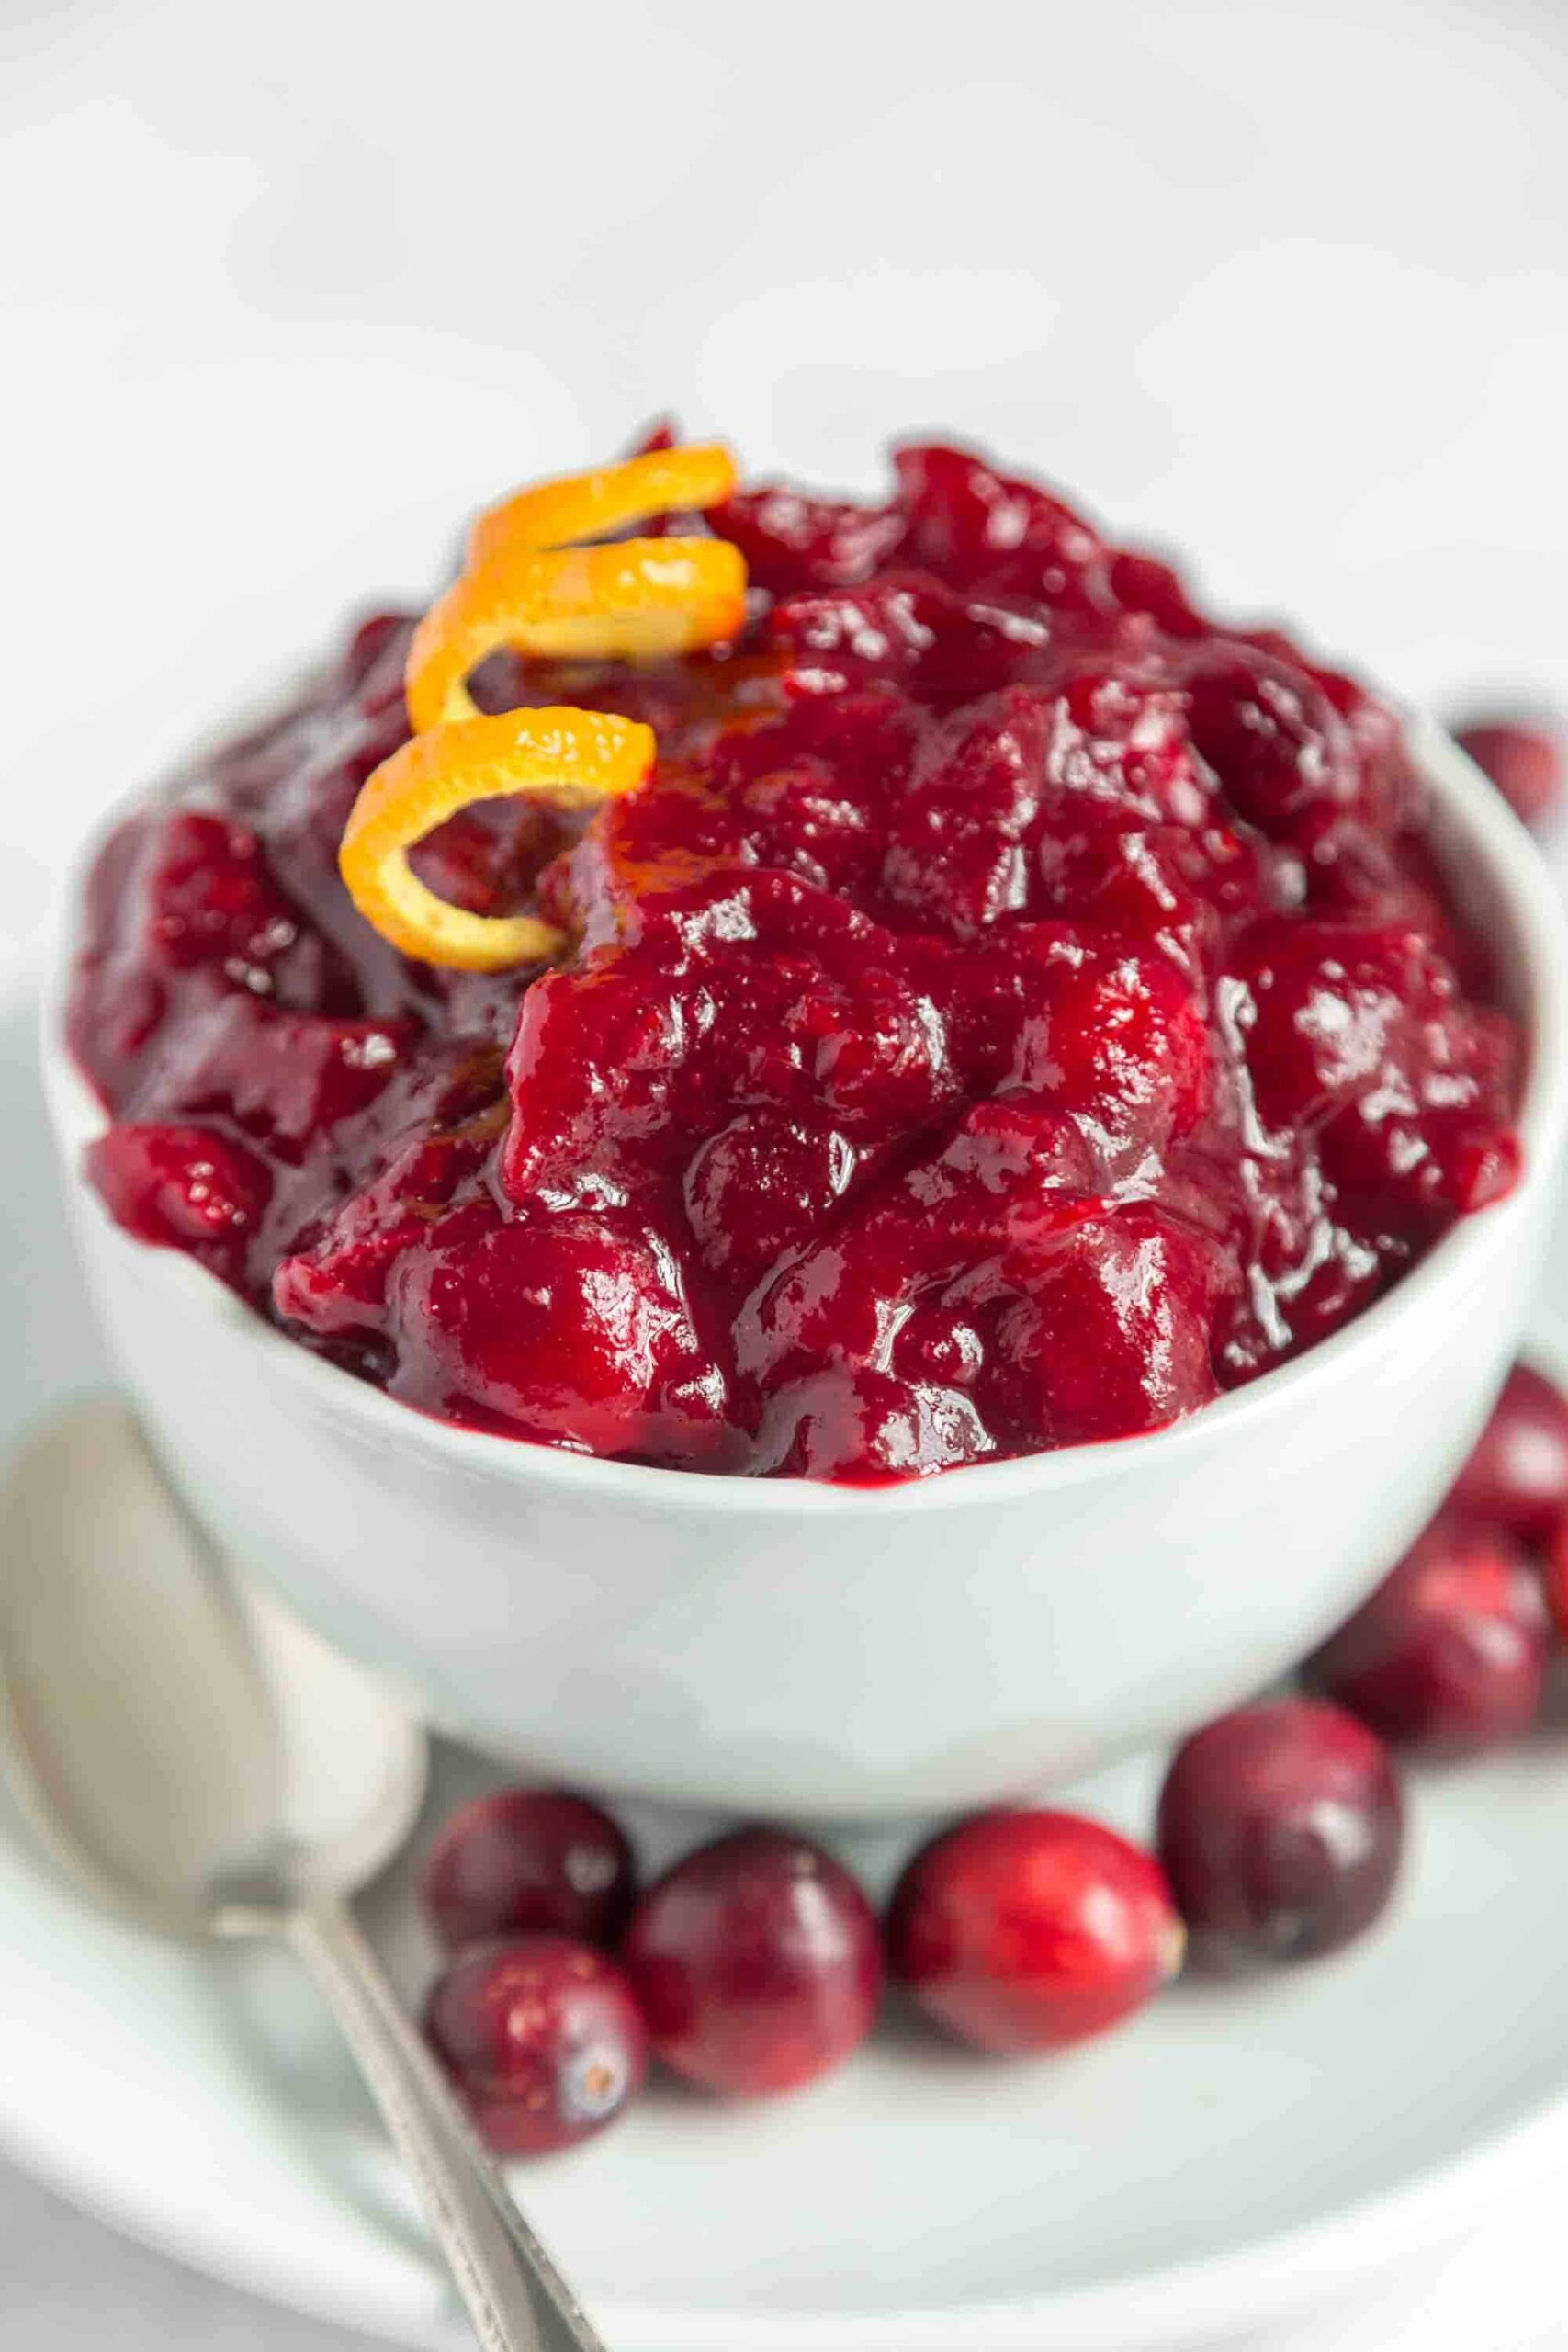 Vegan Cranberry Sauce With Oranges Naturally Sweetened With Maple Syrup.